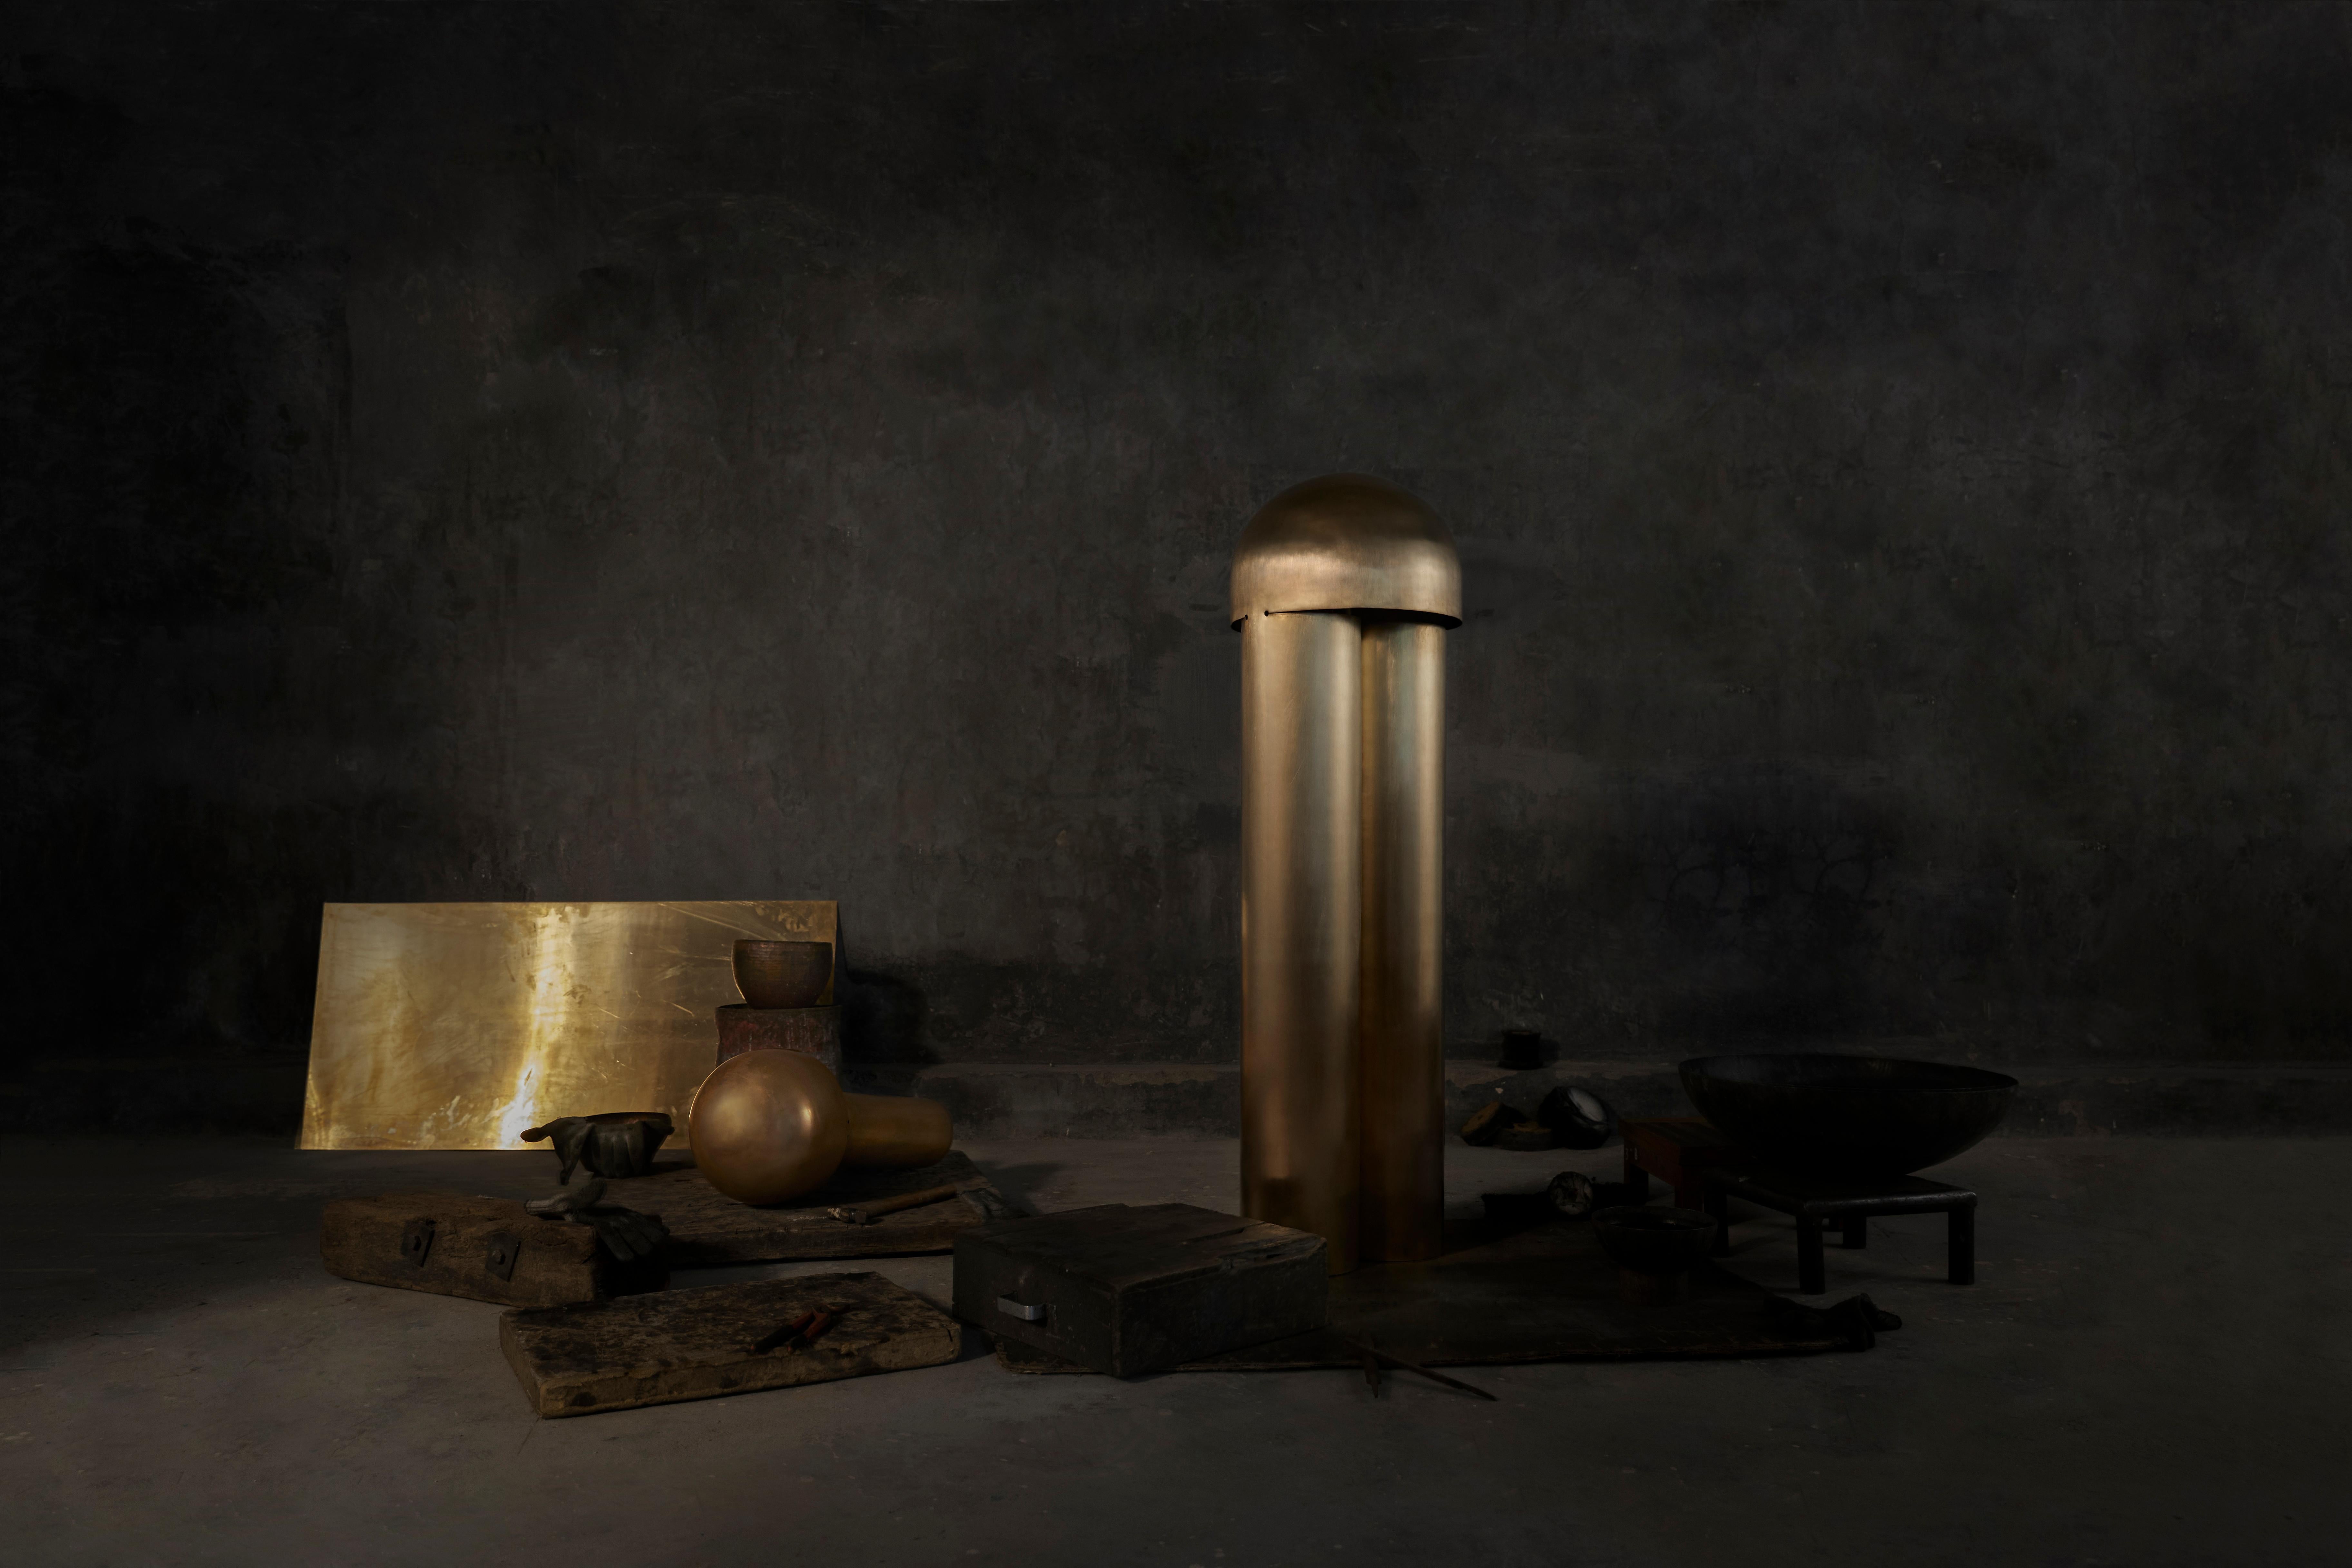 Monolith Brass Sculpted Table Lamp by Paul Matter.
Dimensions: H 419 mm x D 203.2 mm.
Materials: Brass
Weight: 3 Kg
Lamping: 1 type E14 base, 3W - 5W led, warm white.
CE certified, voltage 220V - 240V.
Dimmable upon request. Sculpted and assembled